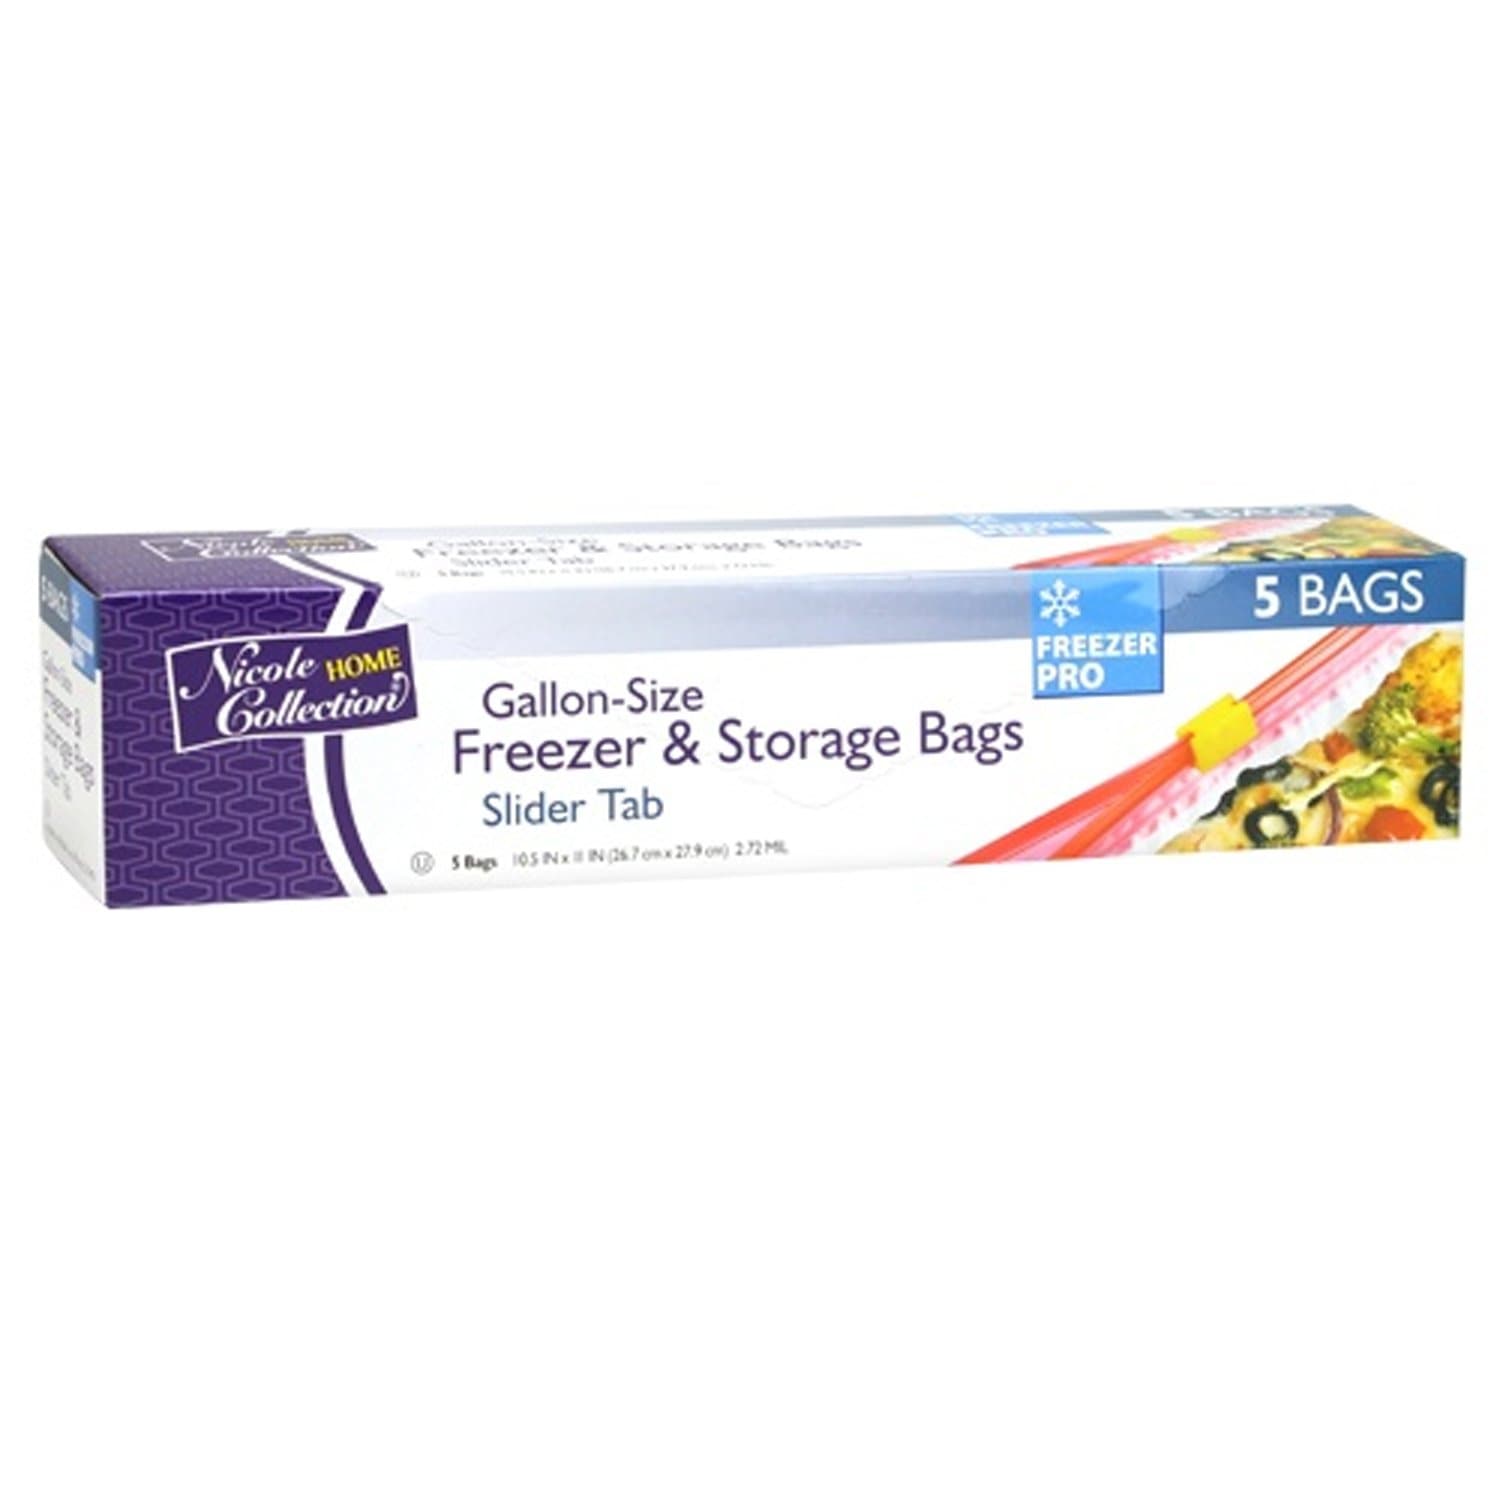 http://onlyonestopshop.com/cdn/shop/products/Nicole-Home-Collection-Gallon-Size-Freezer-Storage-Bags-with-Slide-Nicole-Collection-1603927299.jpg?v=1603927304